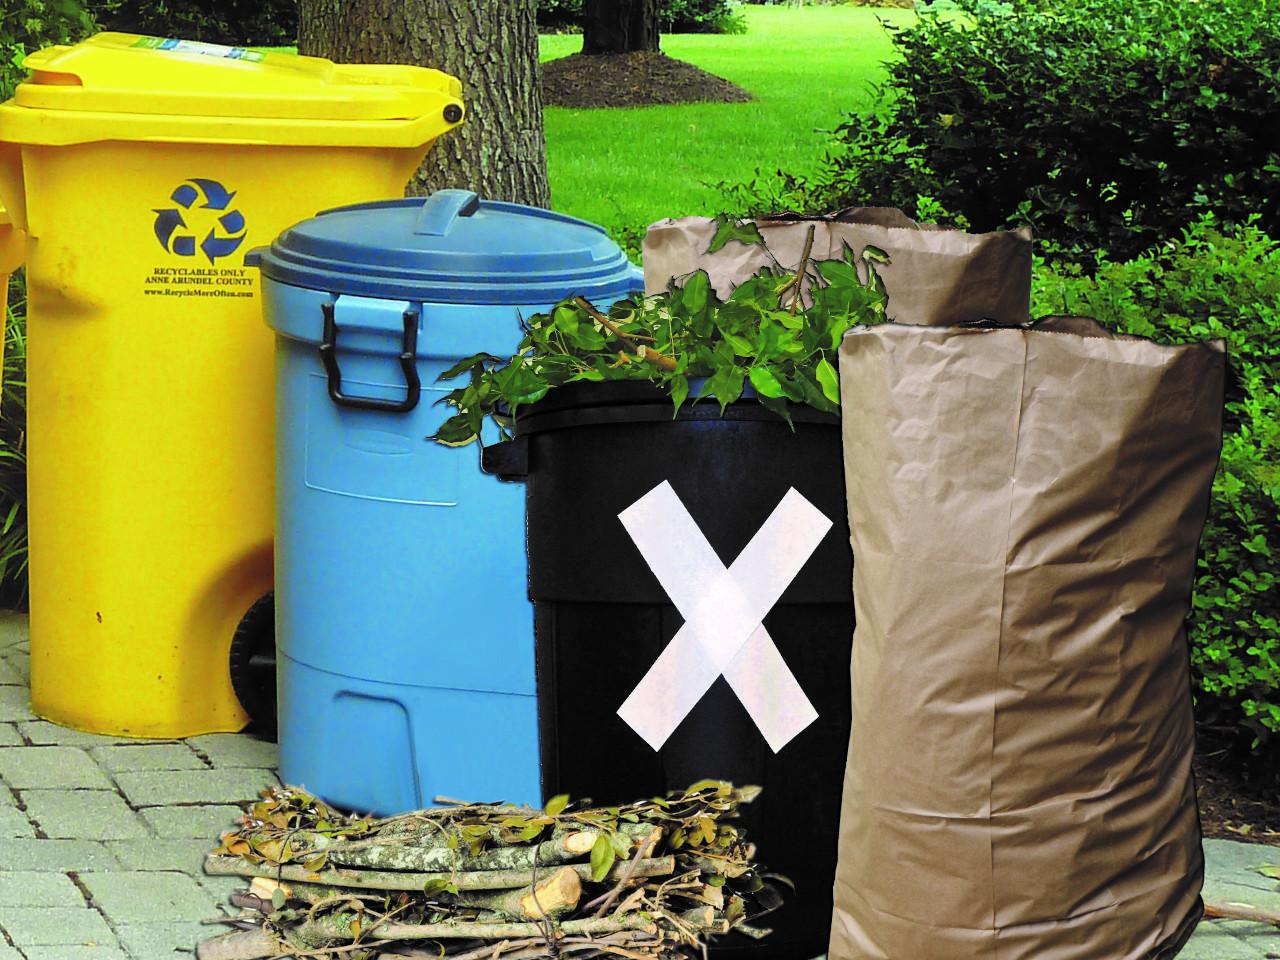 Yard Waste  Anne Arundel County Government